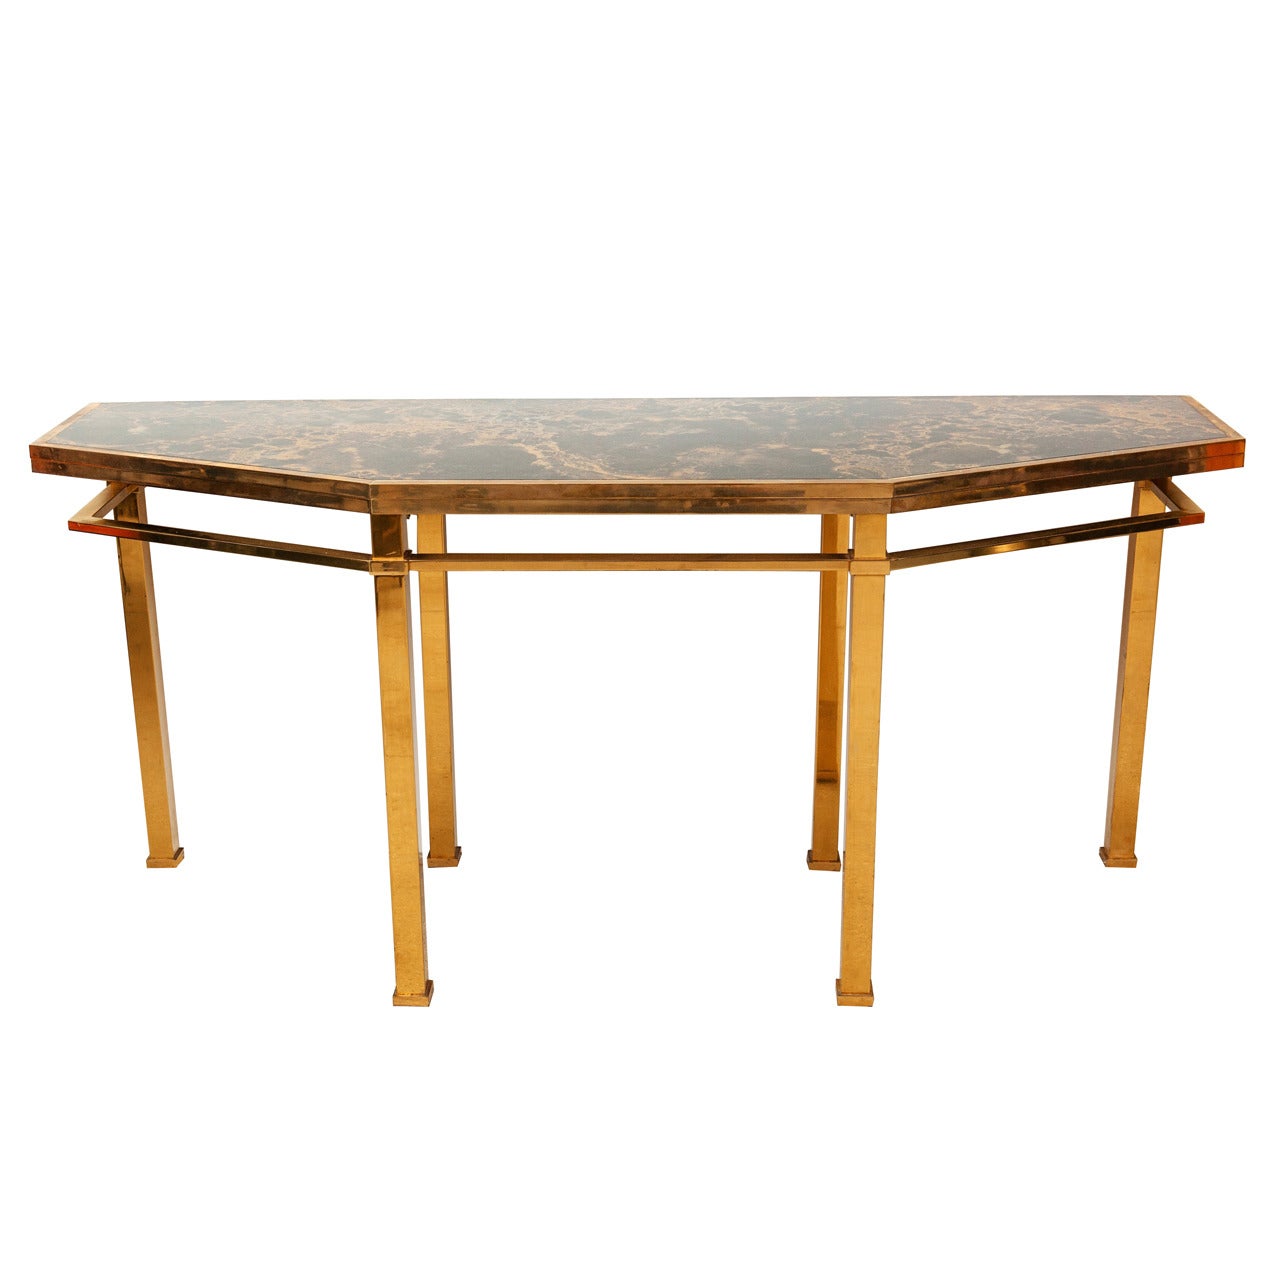 Rare Maison Jansen Console or Dining Table by Guy Lefevre